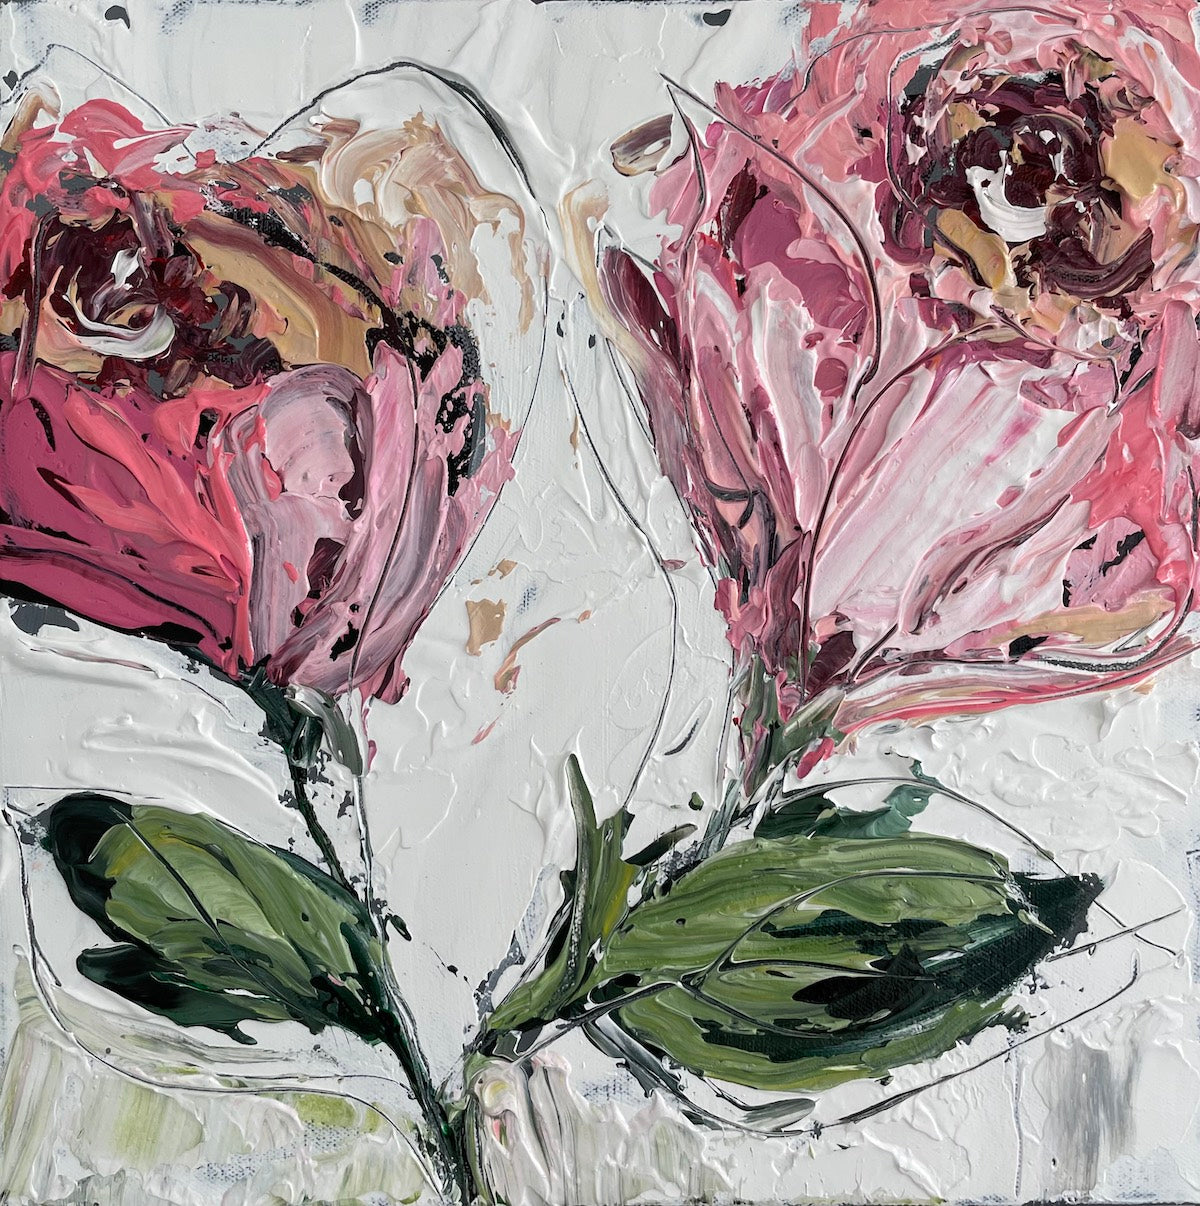 Floral Abstract Paintings 12x12 inches